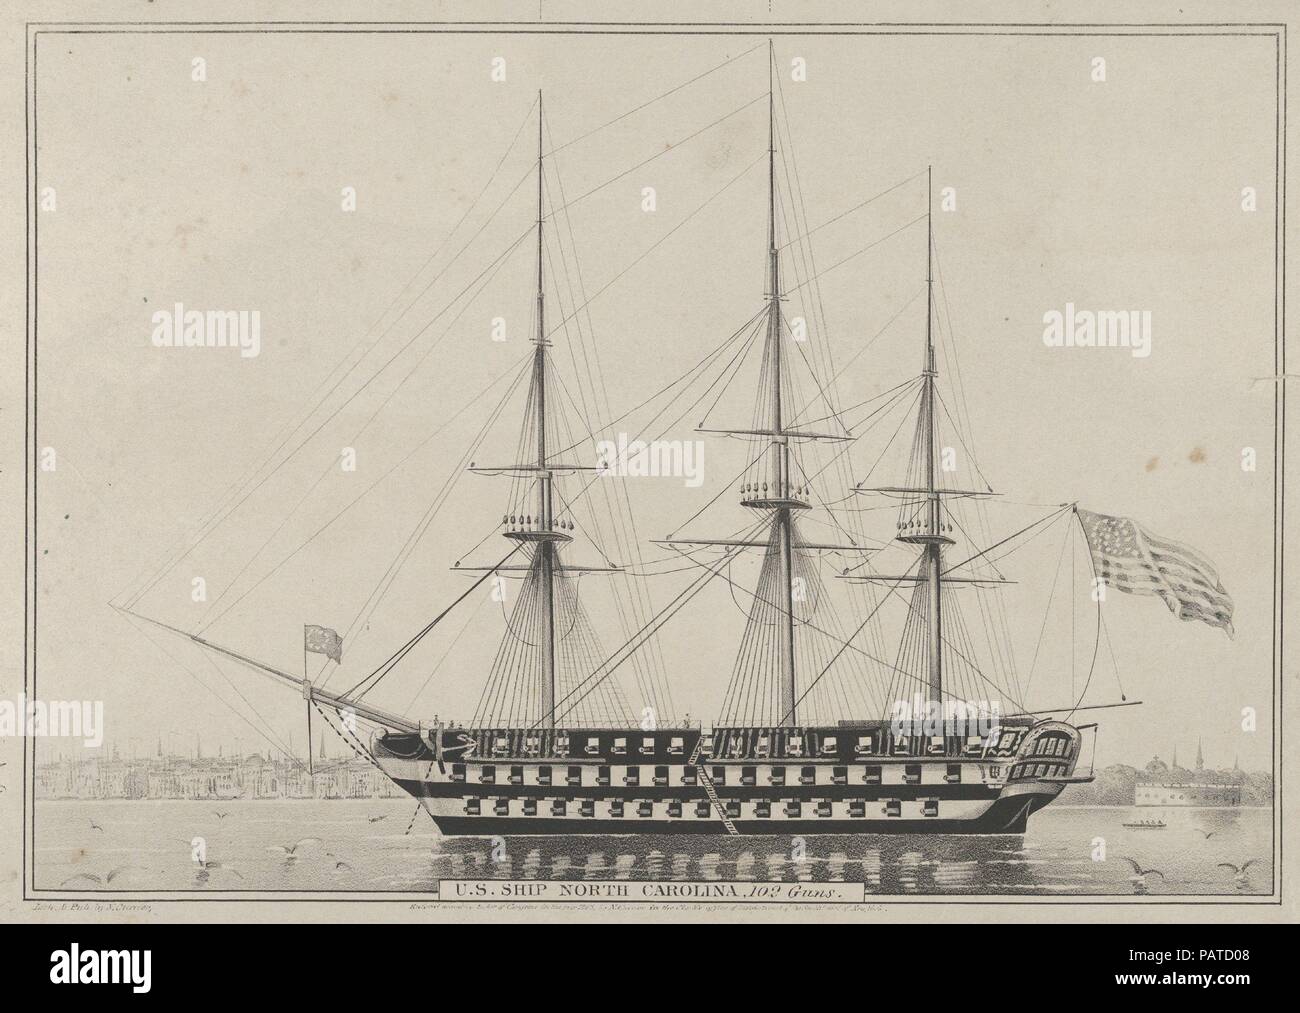 U. S. Ship North Carolina, 102 Guns. Dimensions: Image: 9 1/8 x 13 1/8 in. (23.2 x 33.3 cm)  Sheet: 11 15/16 x 15 1/2 in. (30.3 x 39.4 cm). Publisher: Lithographed and published by Nathaniel Currier (American, Roxbury, Massachusetts 1813-1888 New York). Date: 1843.  Proof. A marine print. A three-masted ship faces left with an American flag flying off the stern. The New York City skyline is visible behind the ship; Castle Garden at right. Unlike many Currier prints, this lithograph has not been hand-colored. Museum: Metropolitan Museum of Art, New York, USA. Stock Photo